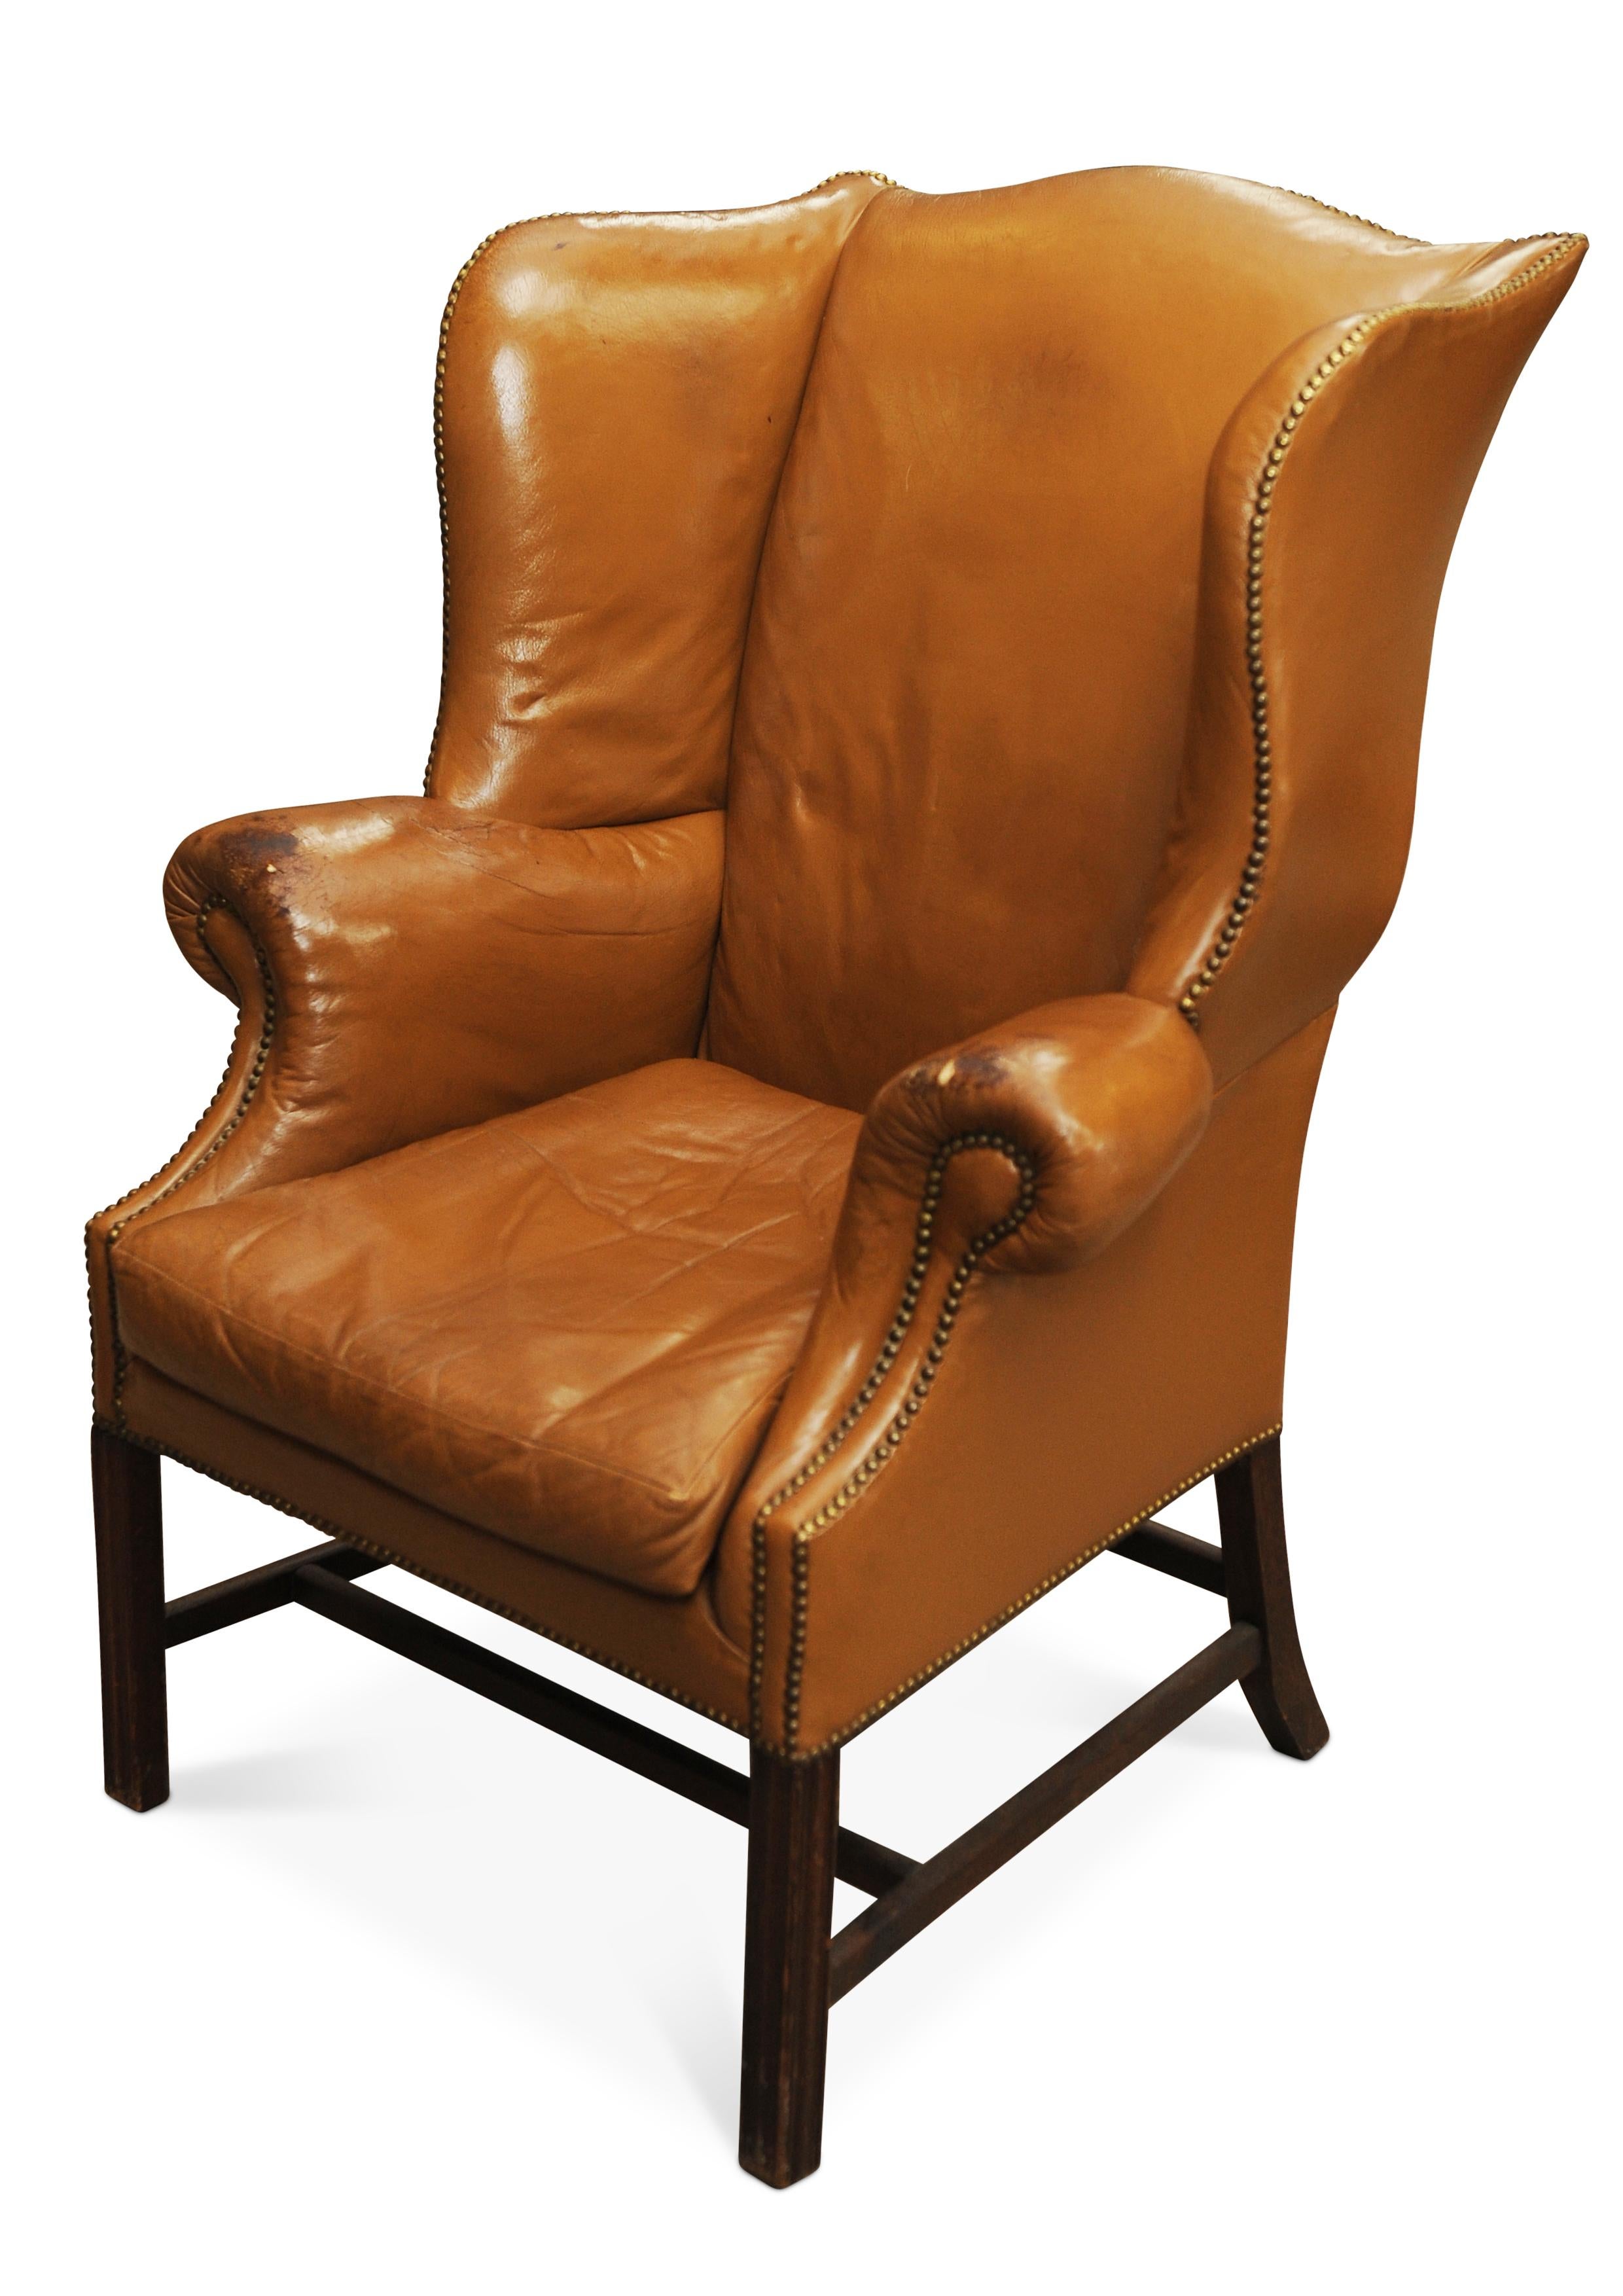 British 19th Century Georgian Mahogany And Tan Leather Wing Back Armchair  For Sale